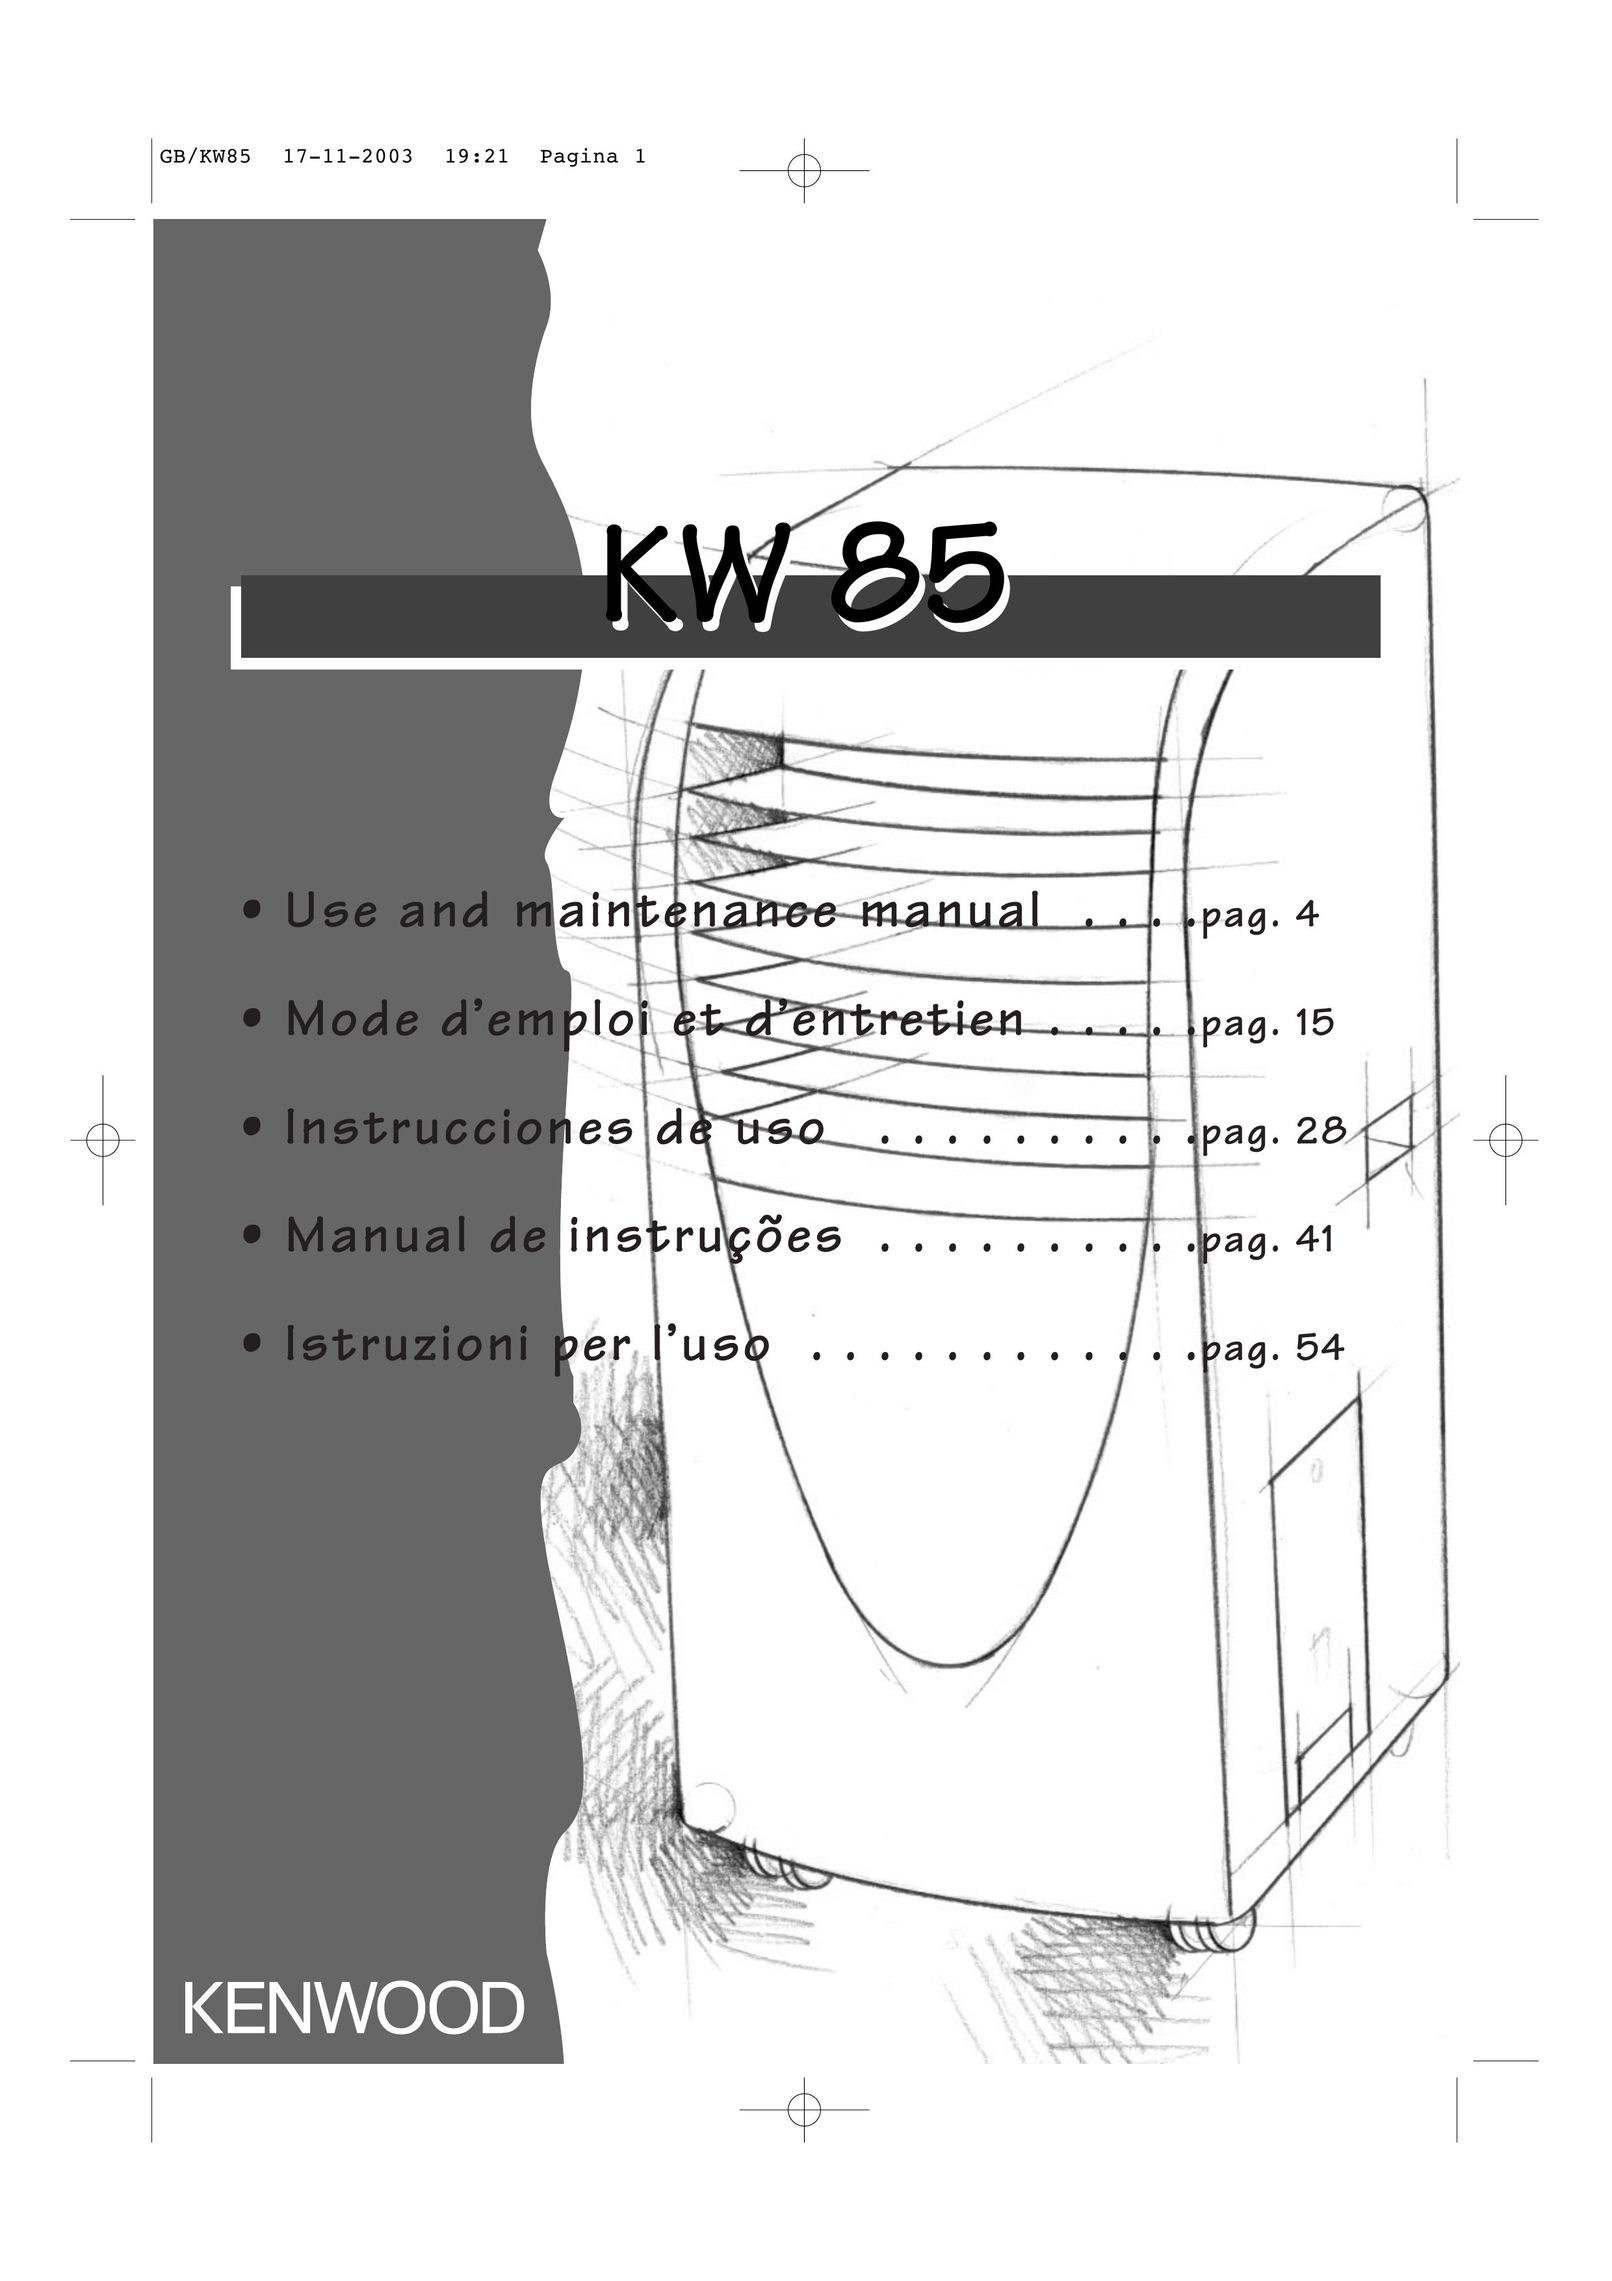 Kenwood KW85 Air Conditioner User Manual